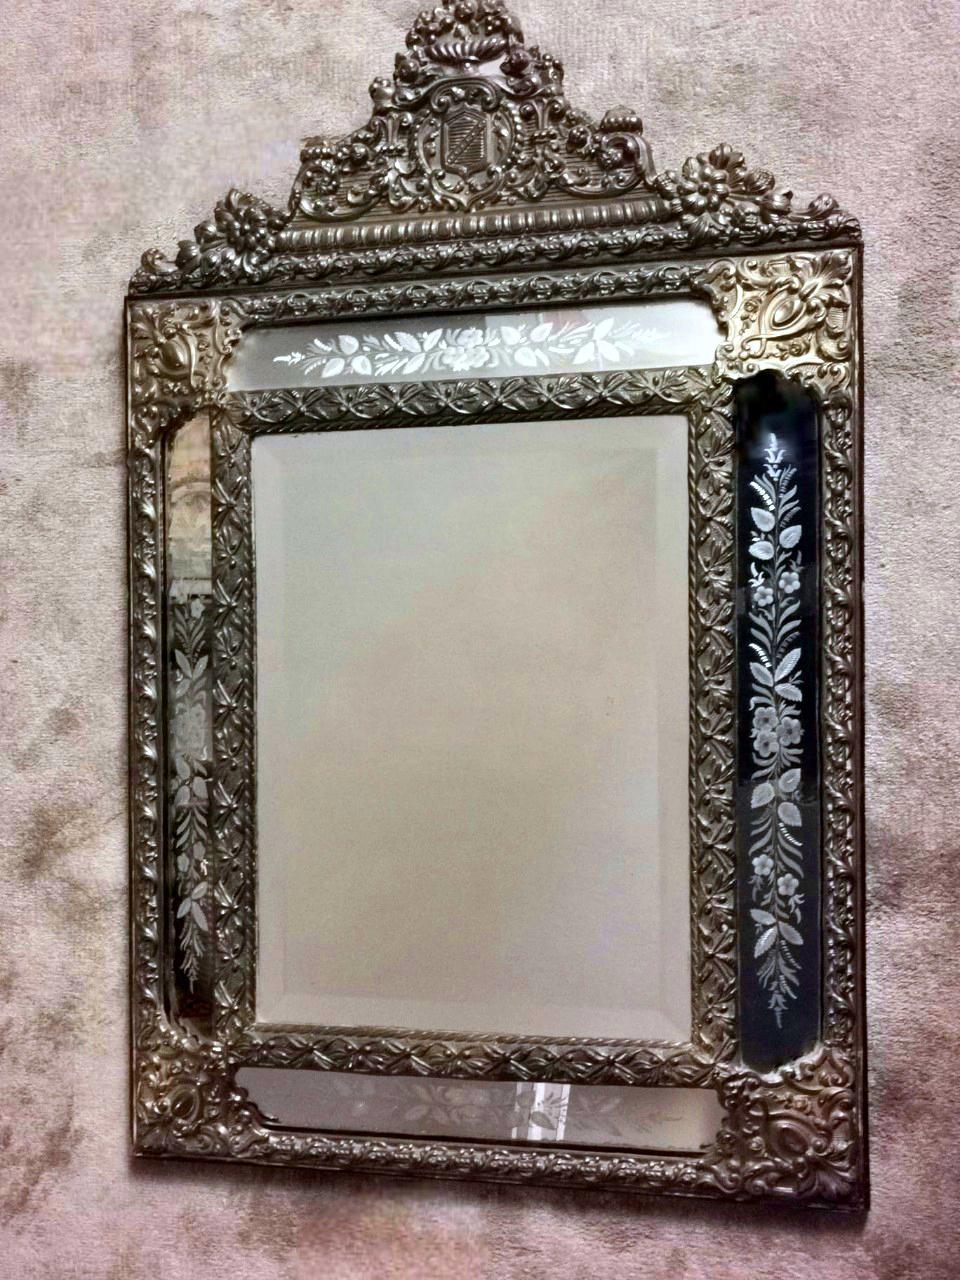 We kindly suggest that you read the entire description, as with it we try to give you detailed technical and historical information to guarantee the authenticity of our objects.
Large and imposing brass plate frame from the Napoleonic era with a